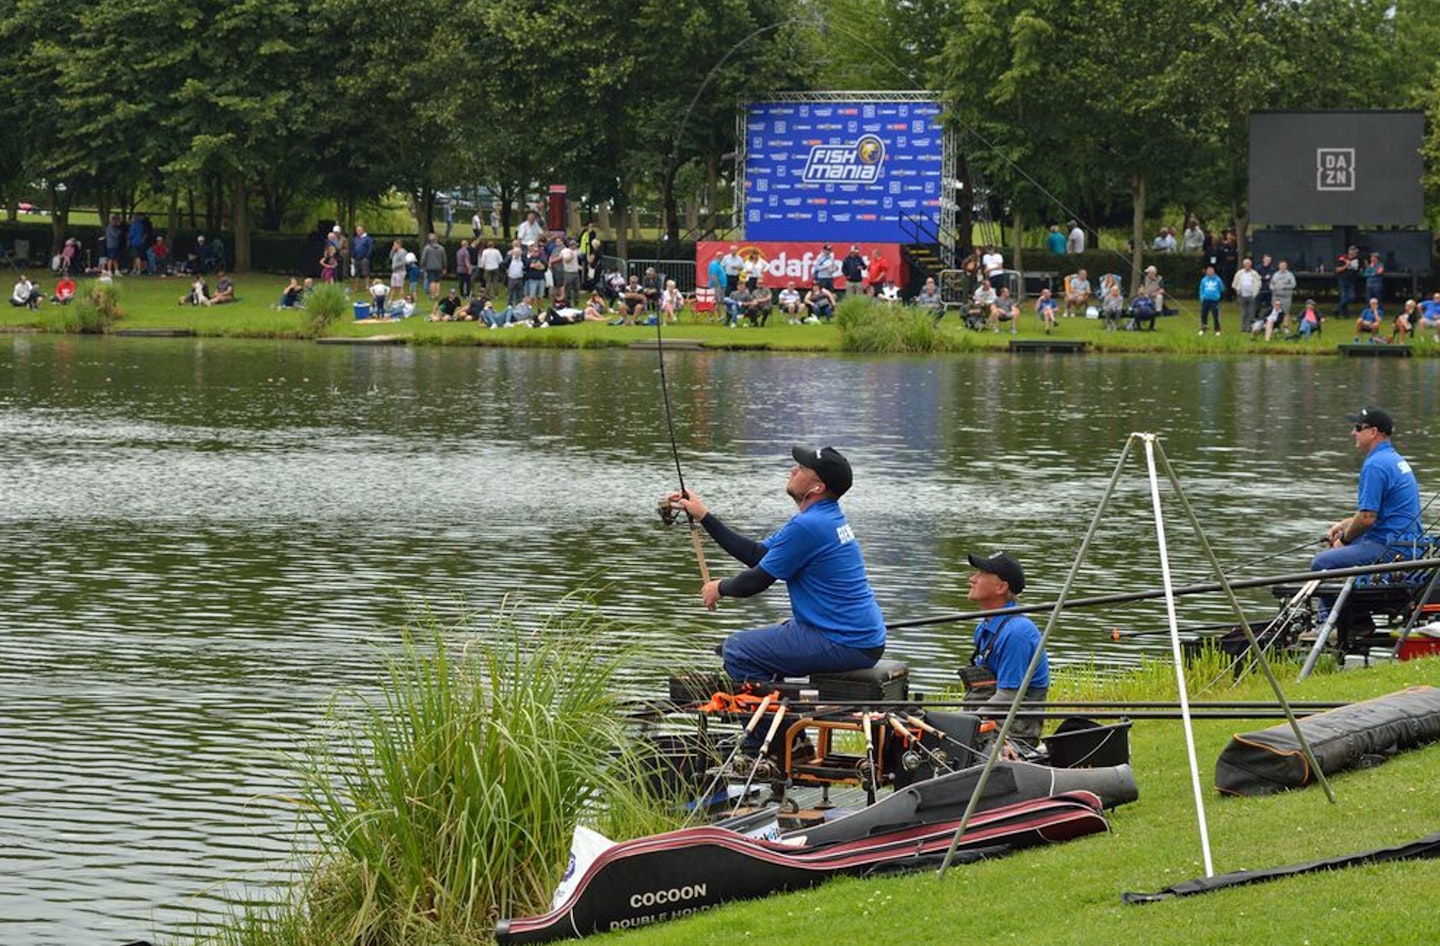 Match angling is awash with money, with more events than ever offering eye-watering prize funds